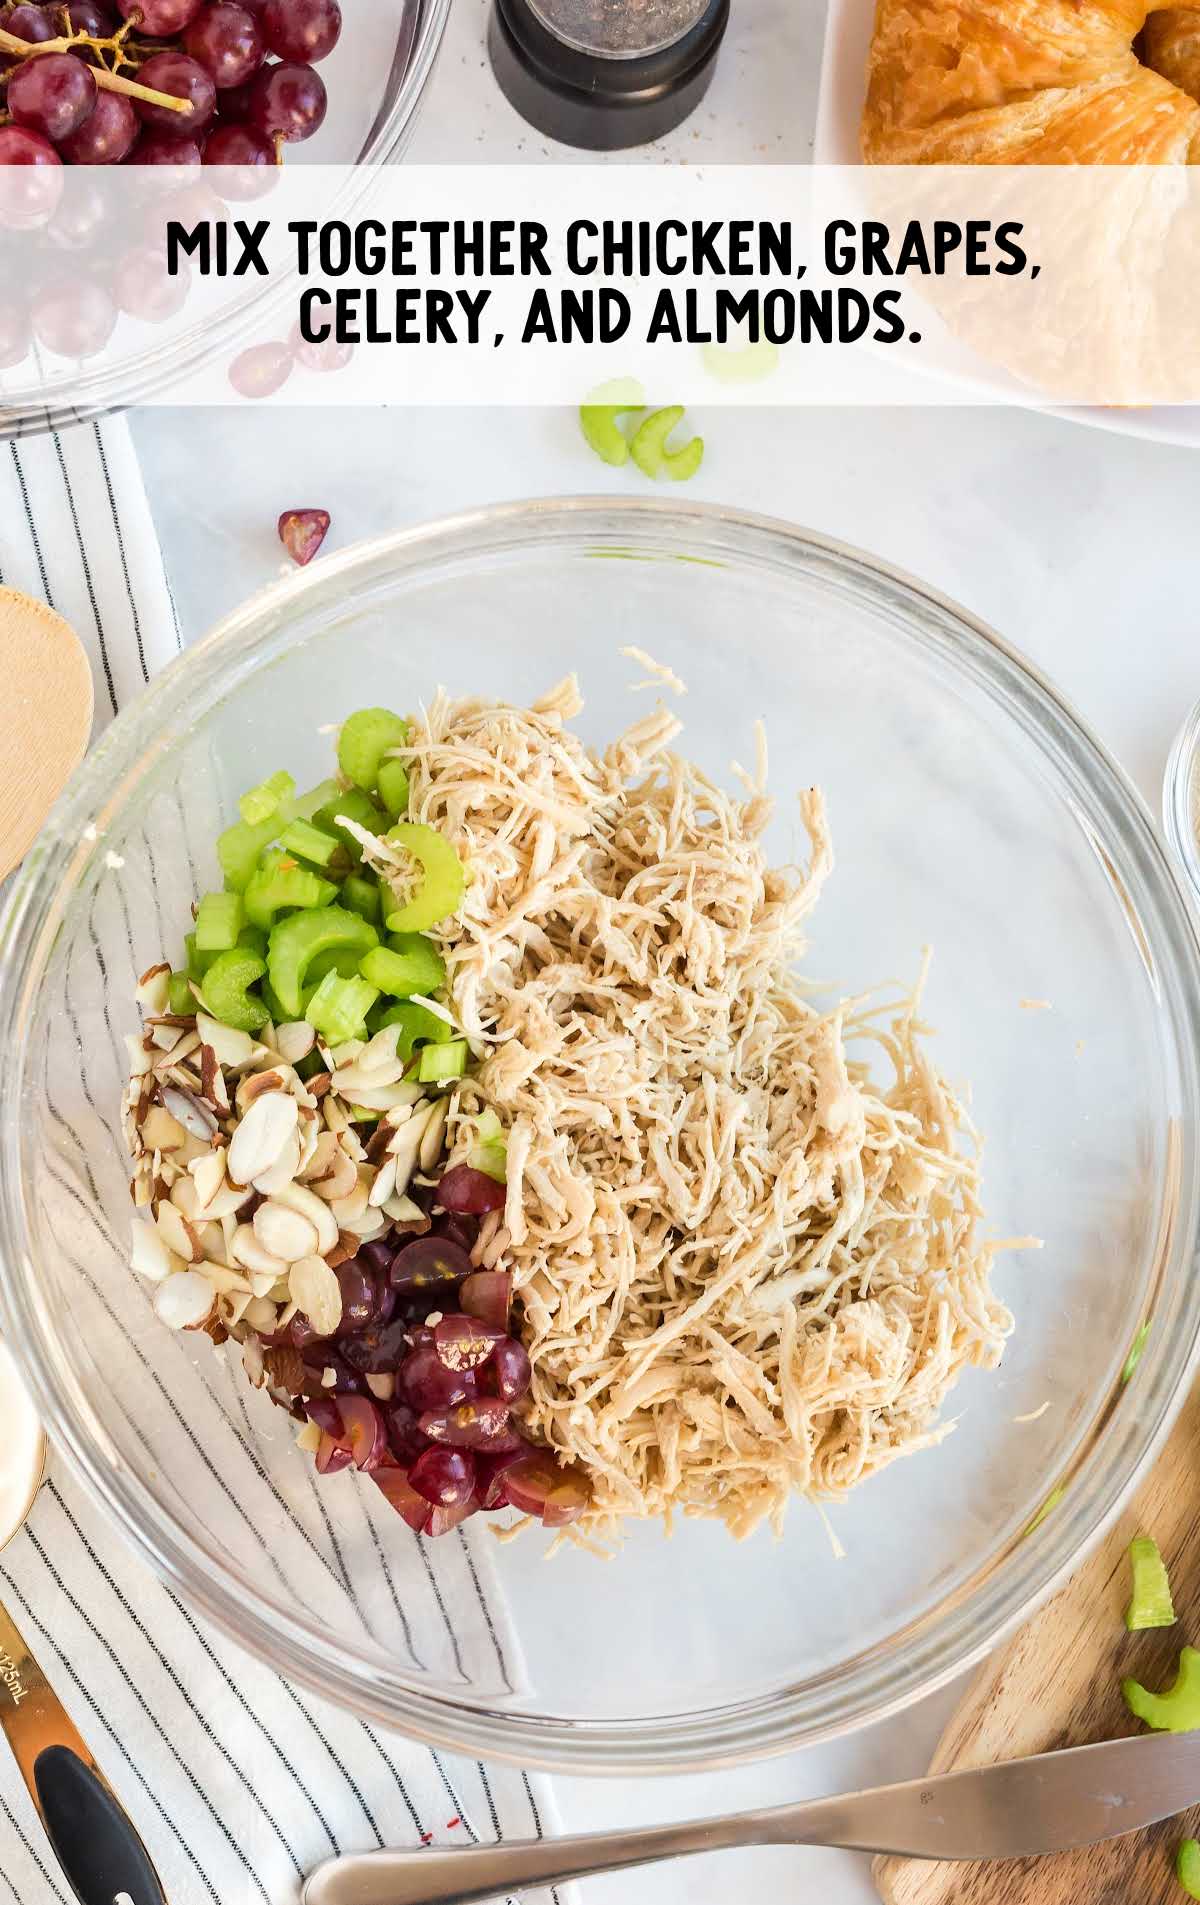 chicken, grapes, celery, and almonds in a bowl